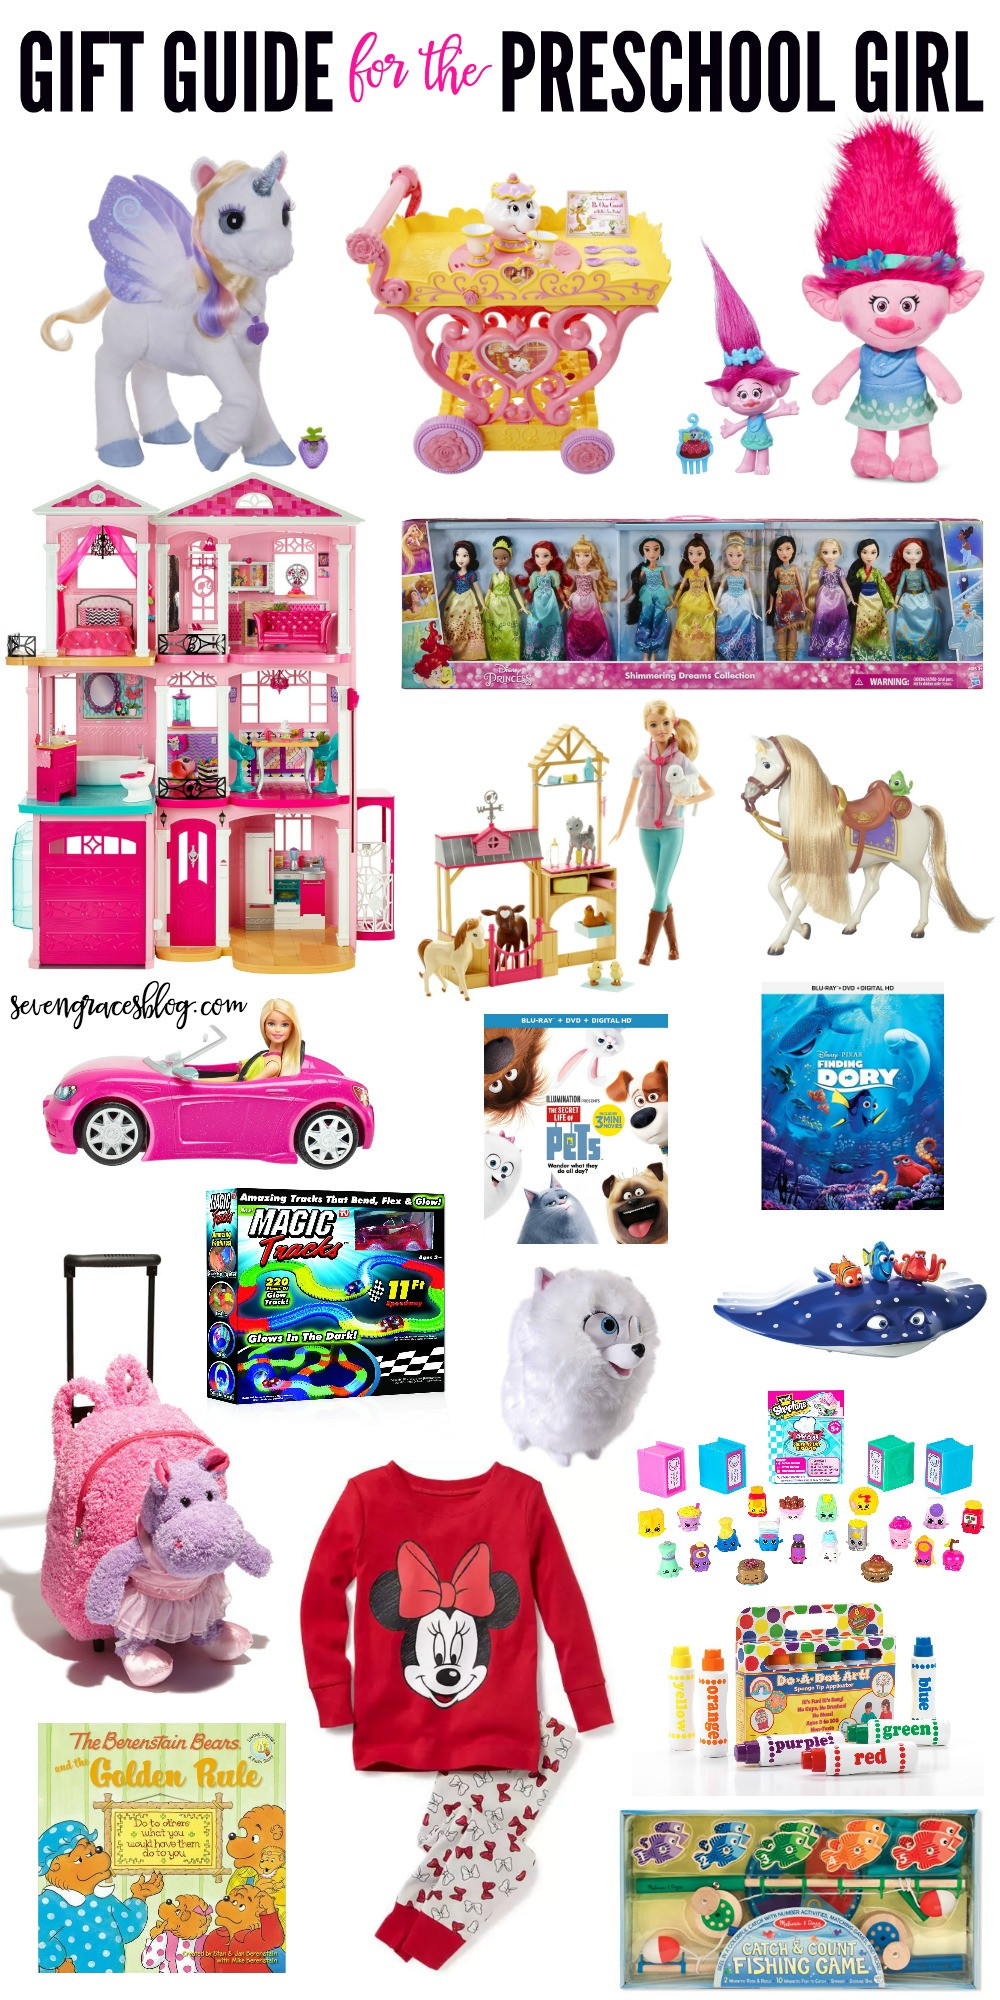 Gift Ideas For Toddler Girls
 Gift Ideas for the Preschool Girl and for Baby s First